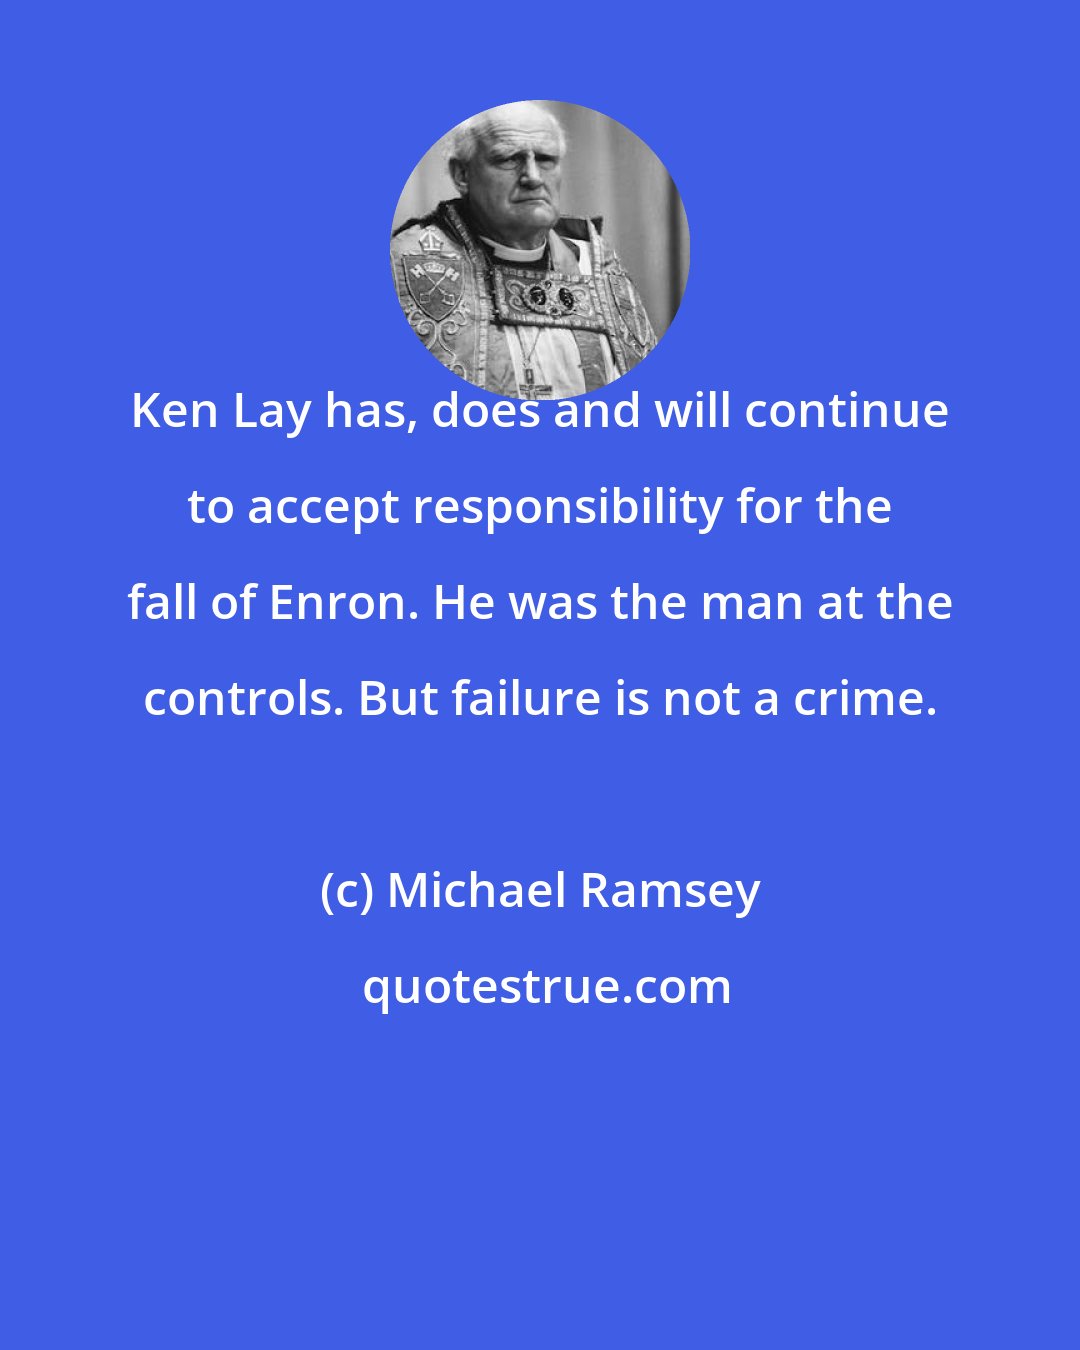 Michael Ramsey: Ken Lay has, does and will continue to accept responsibility for the fall of Enron. He was the man at the controls. But failure is not a crime.